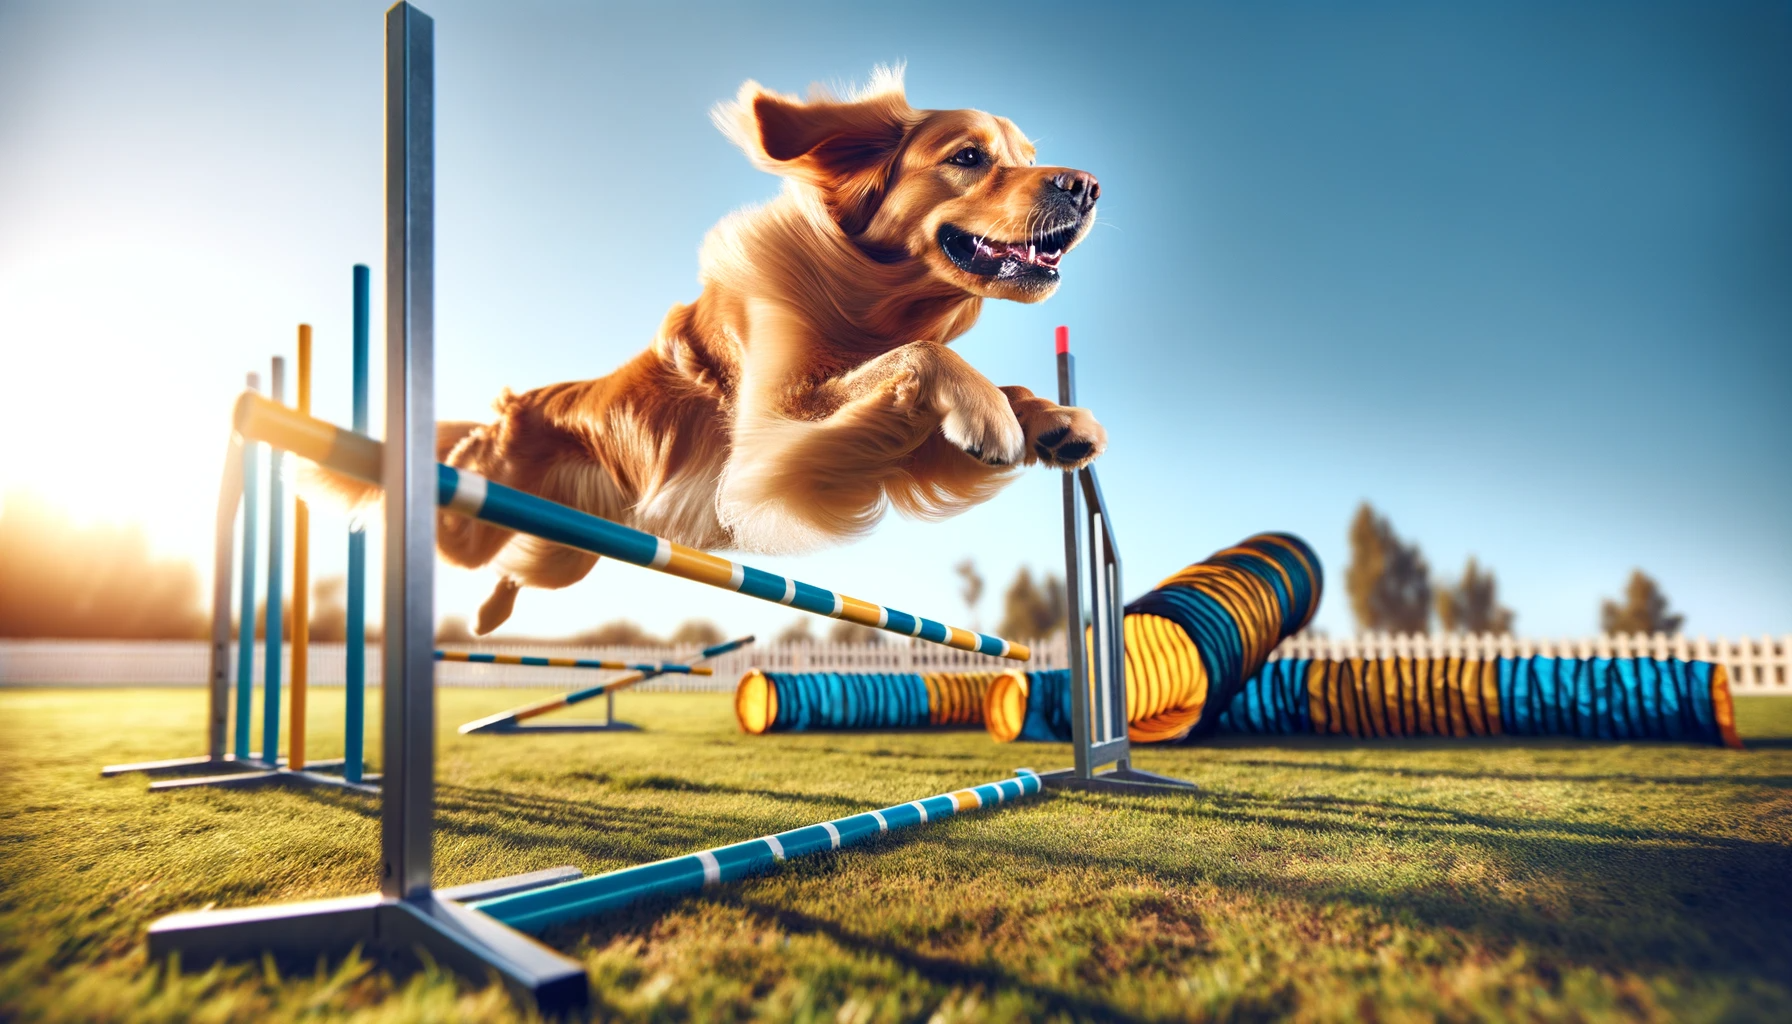 A Goldador skillfully maneuvering through an agility course, showing sharp focus and enthusiasm